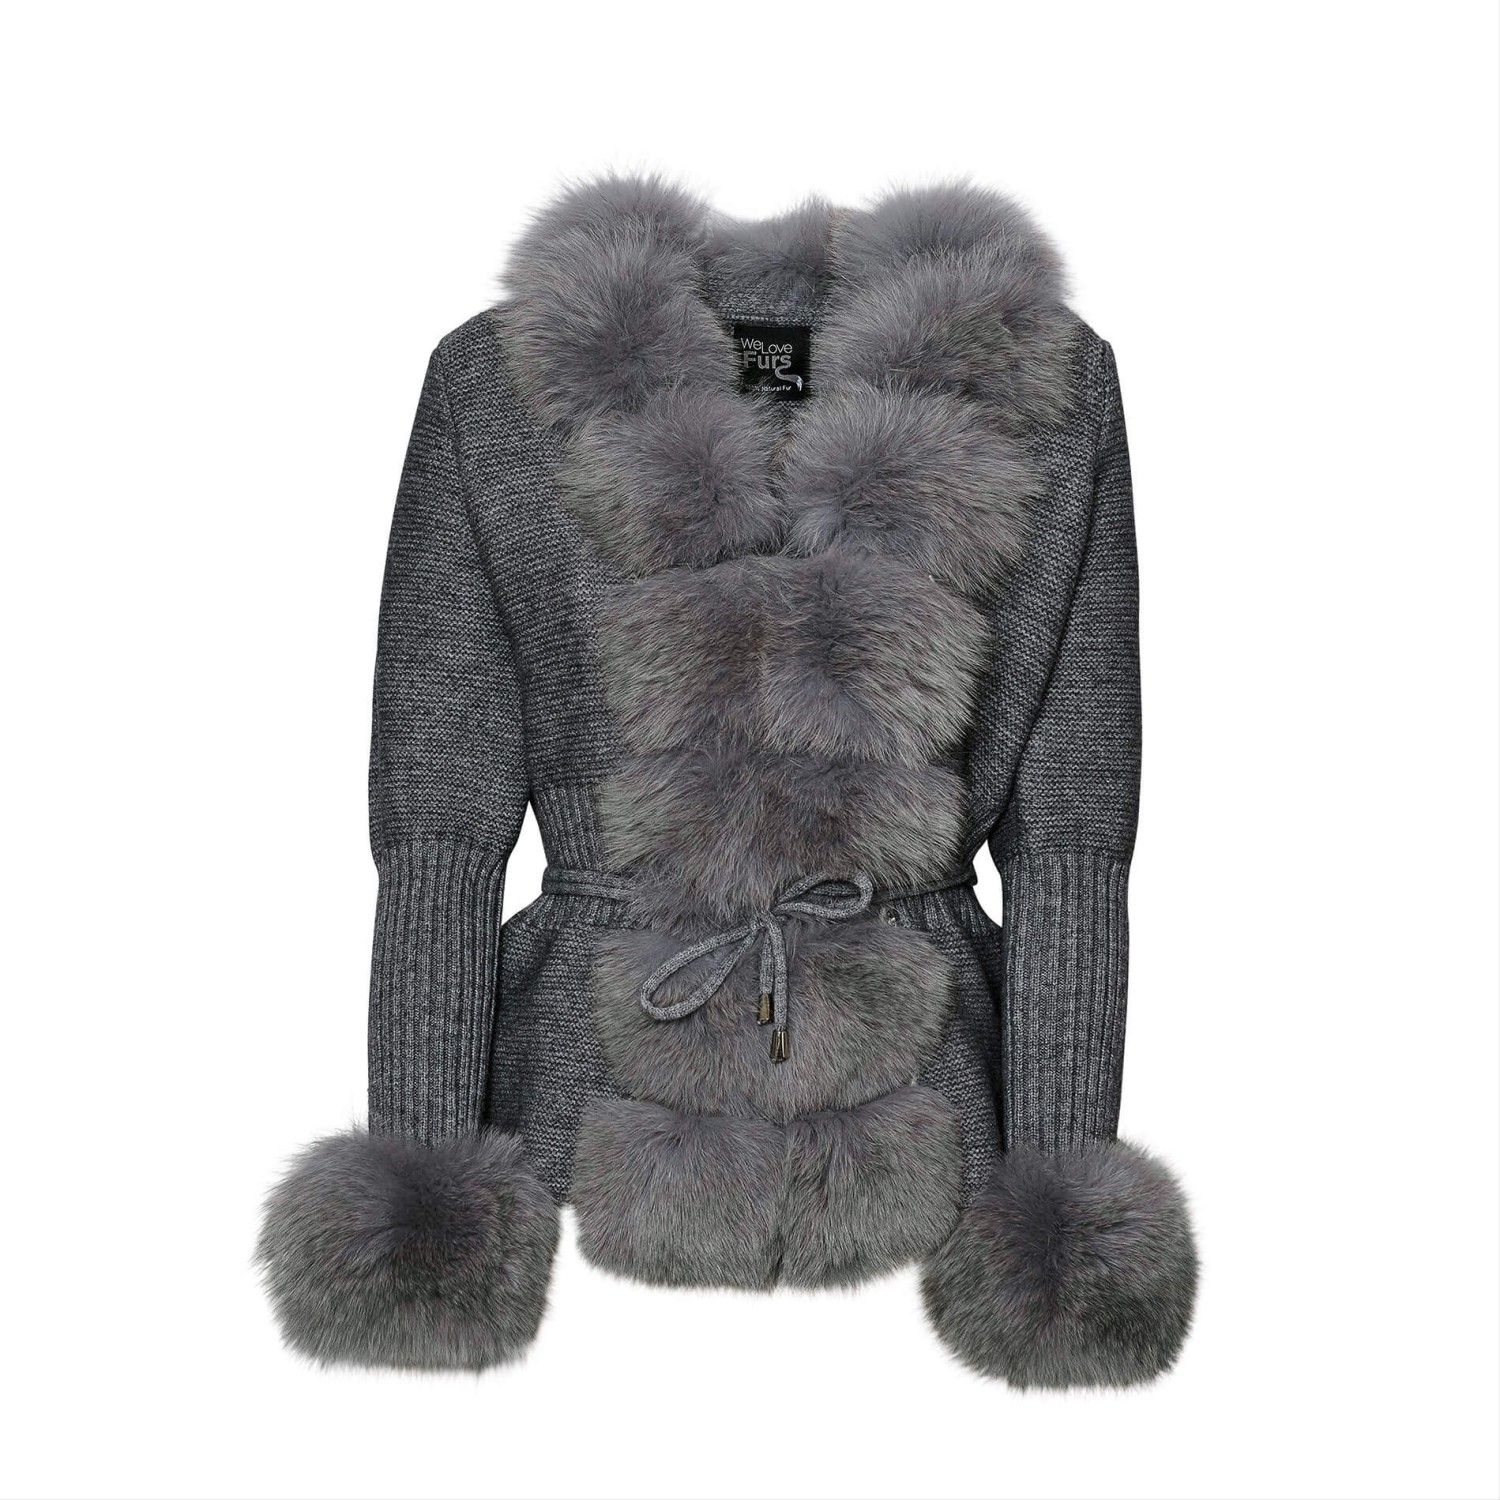 Jacket with fur cuffs and collar